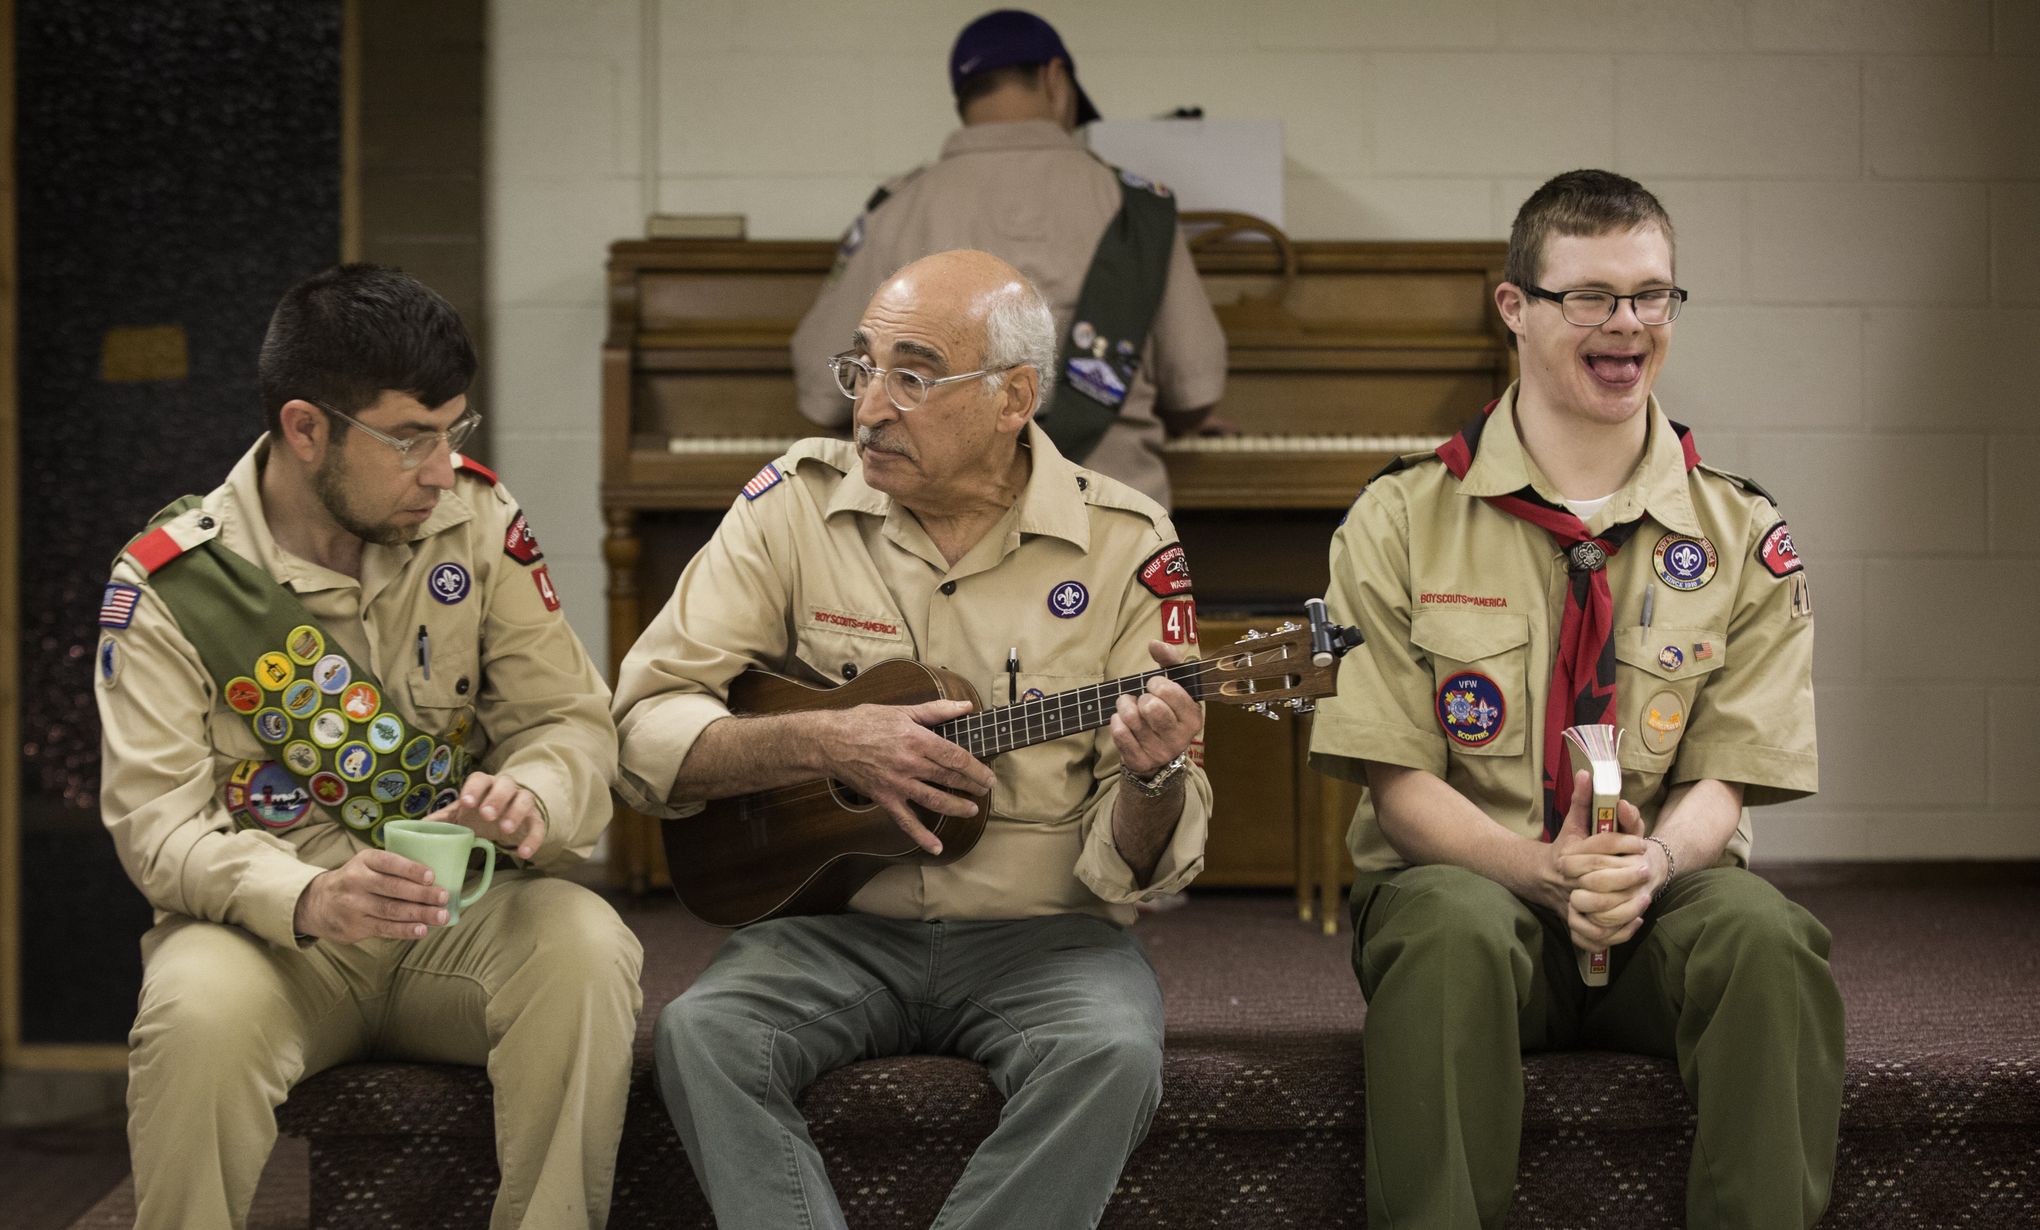 12 local Boy Scouts earn Eagle - Daily Leader